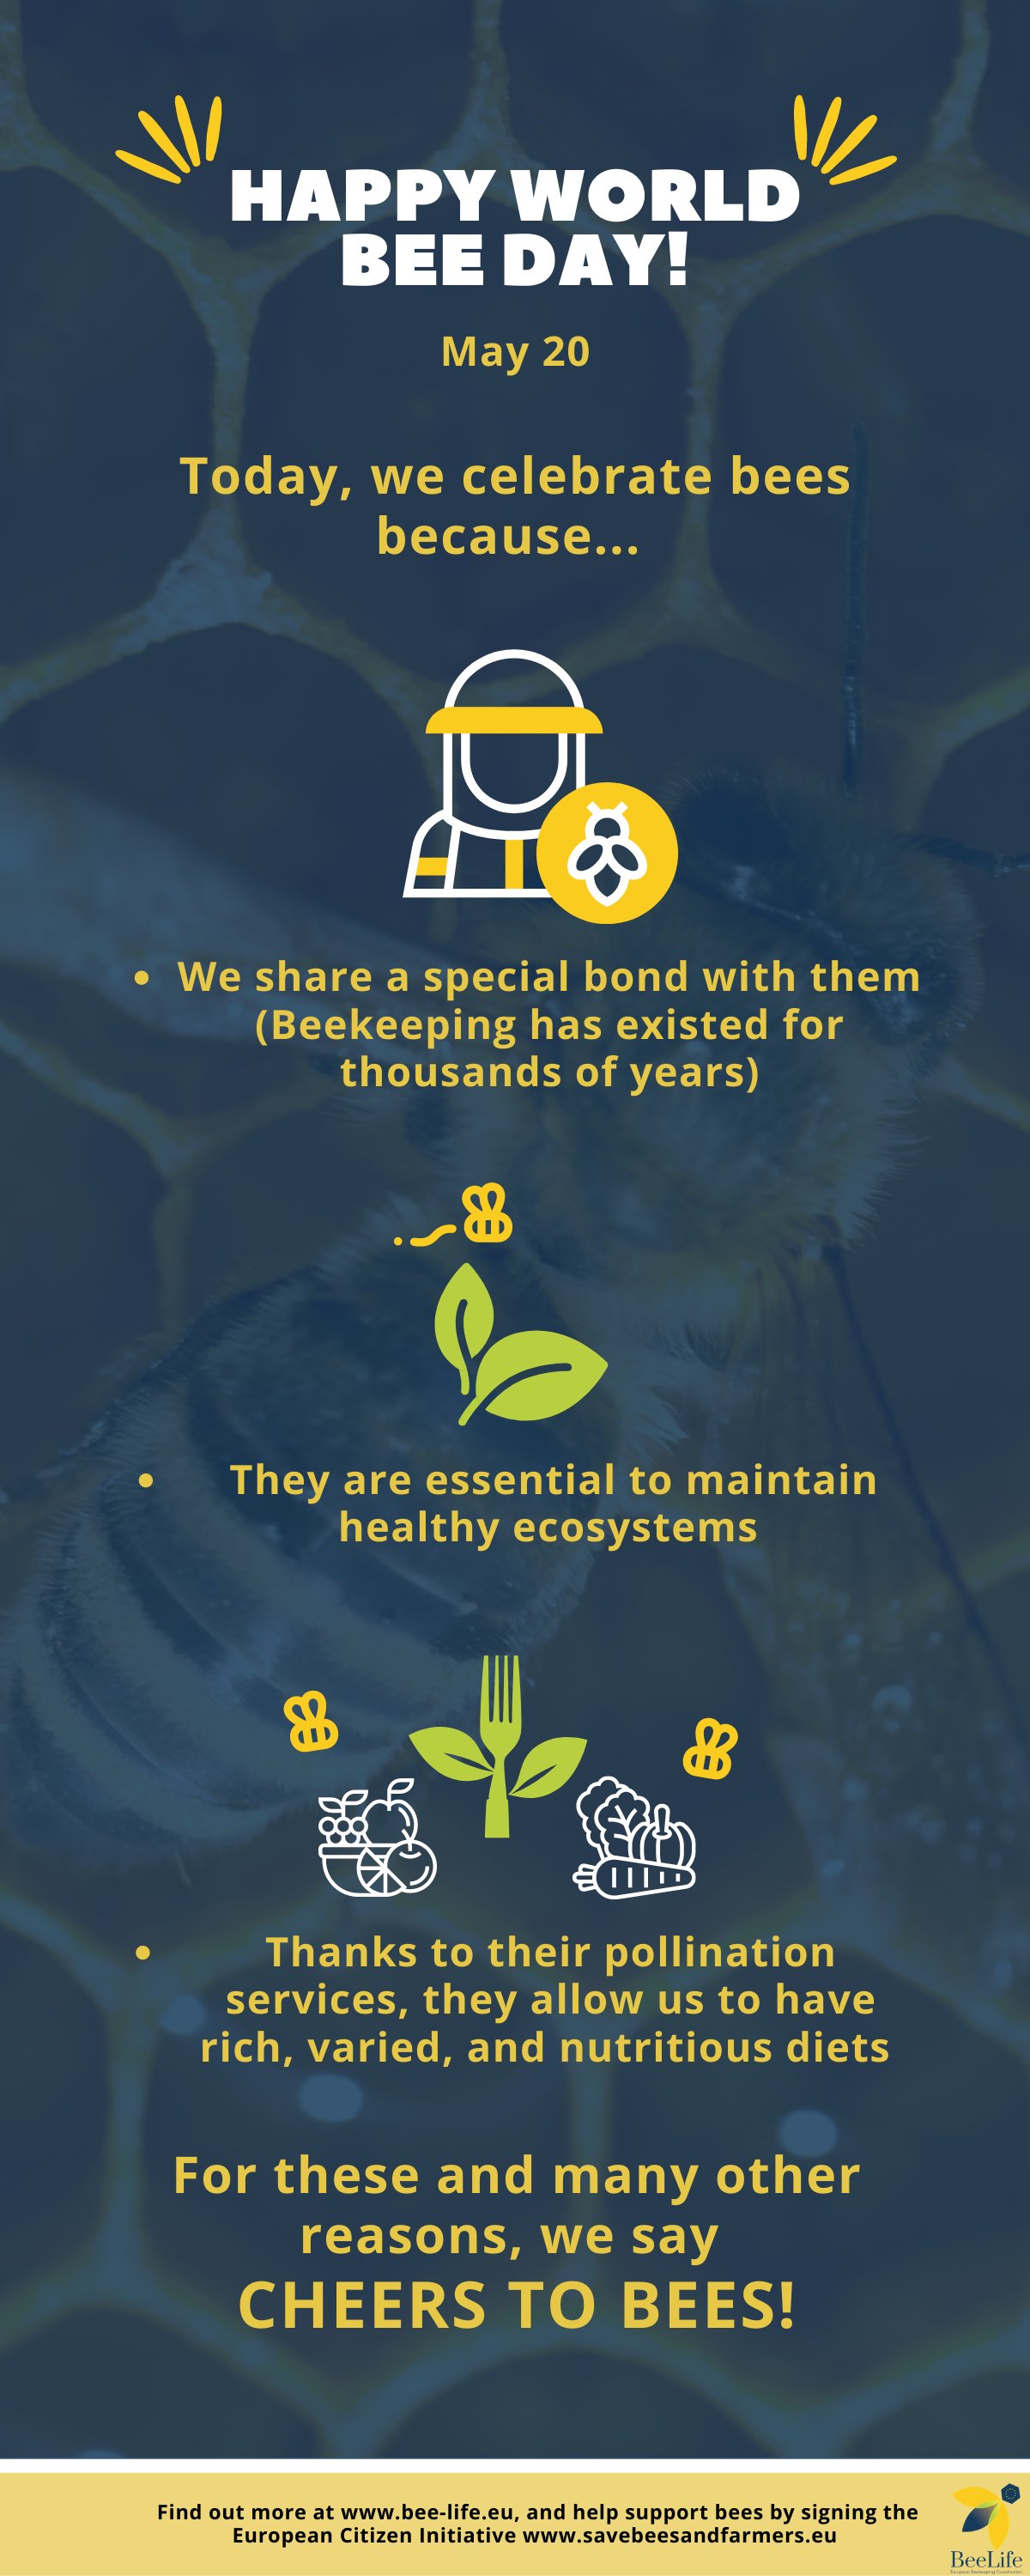 Beelife European Beekeeping Coordination Happy Worldbeeday Today We Celebrate Bees For Many Different Reasons Including The Special Bond We Share Their Role In Maintaining Healthy Ecosystems And Much More We